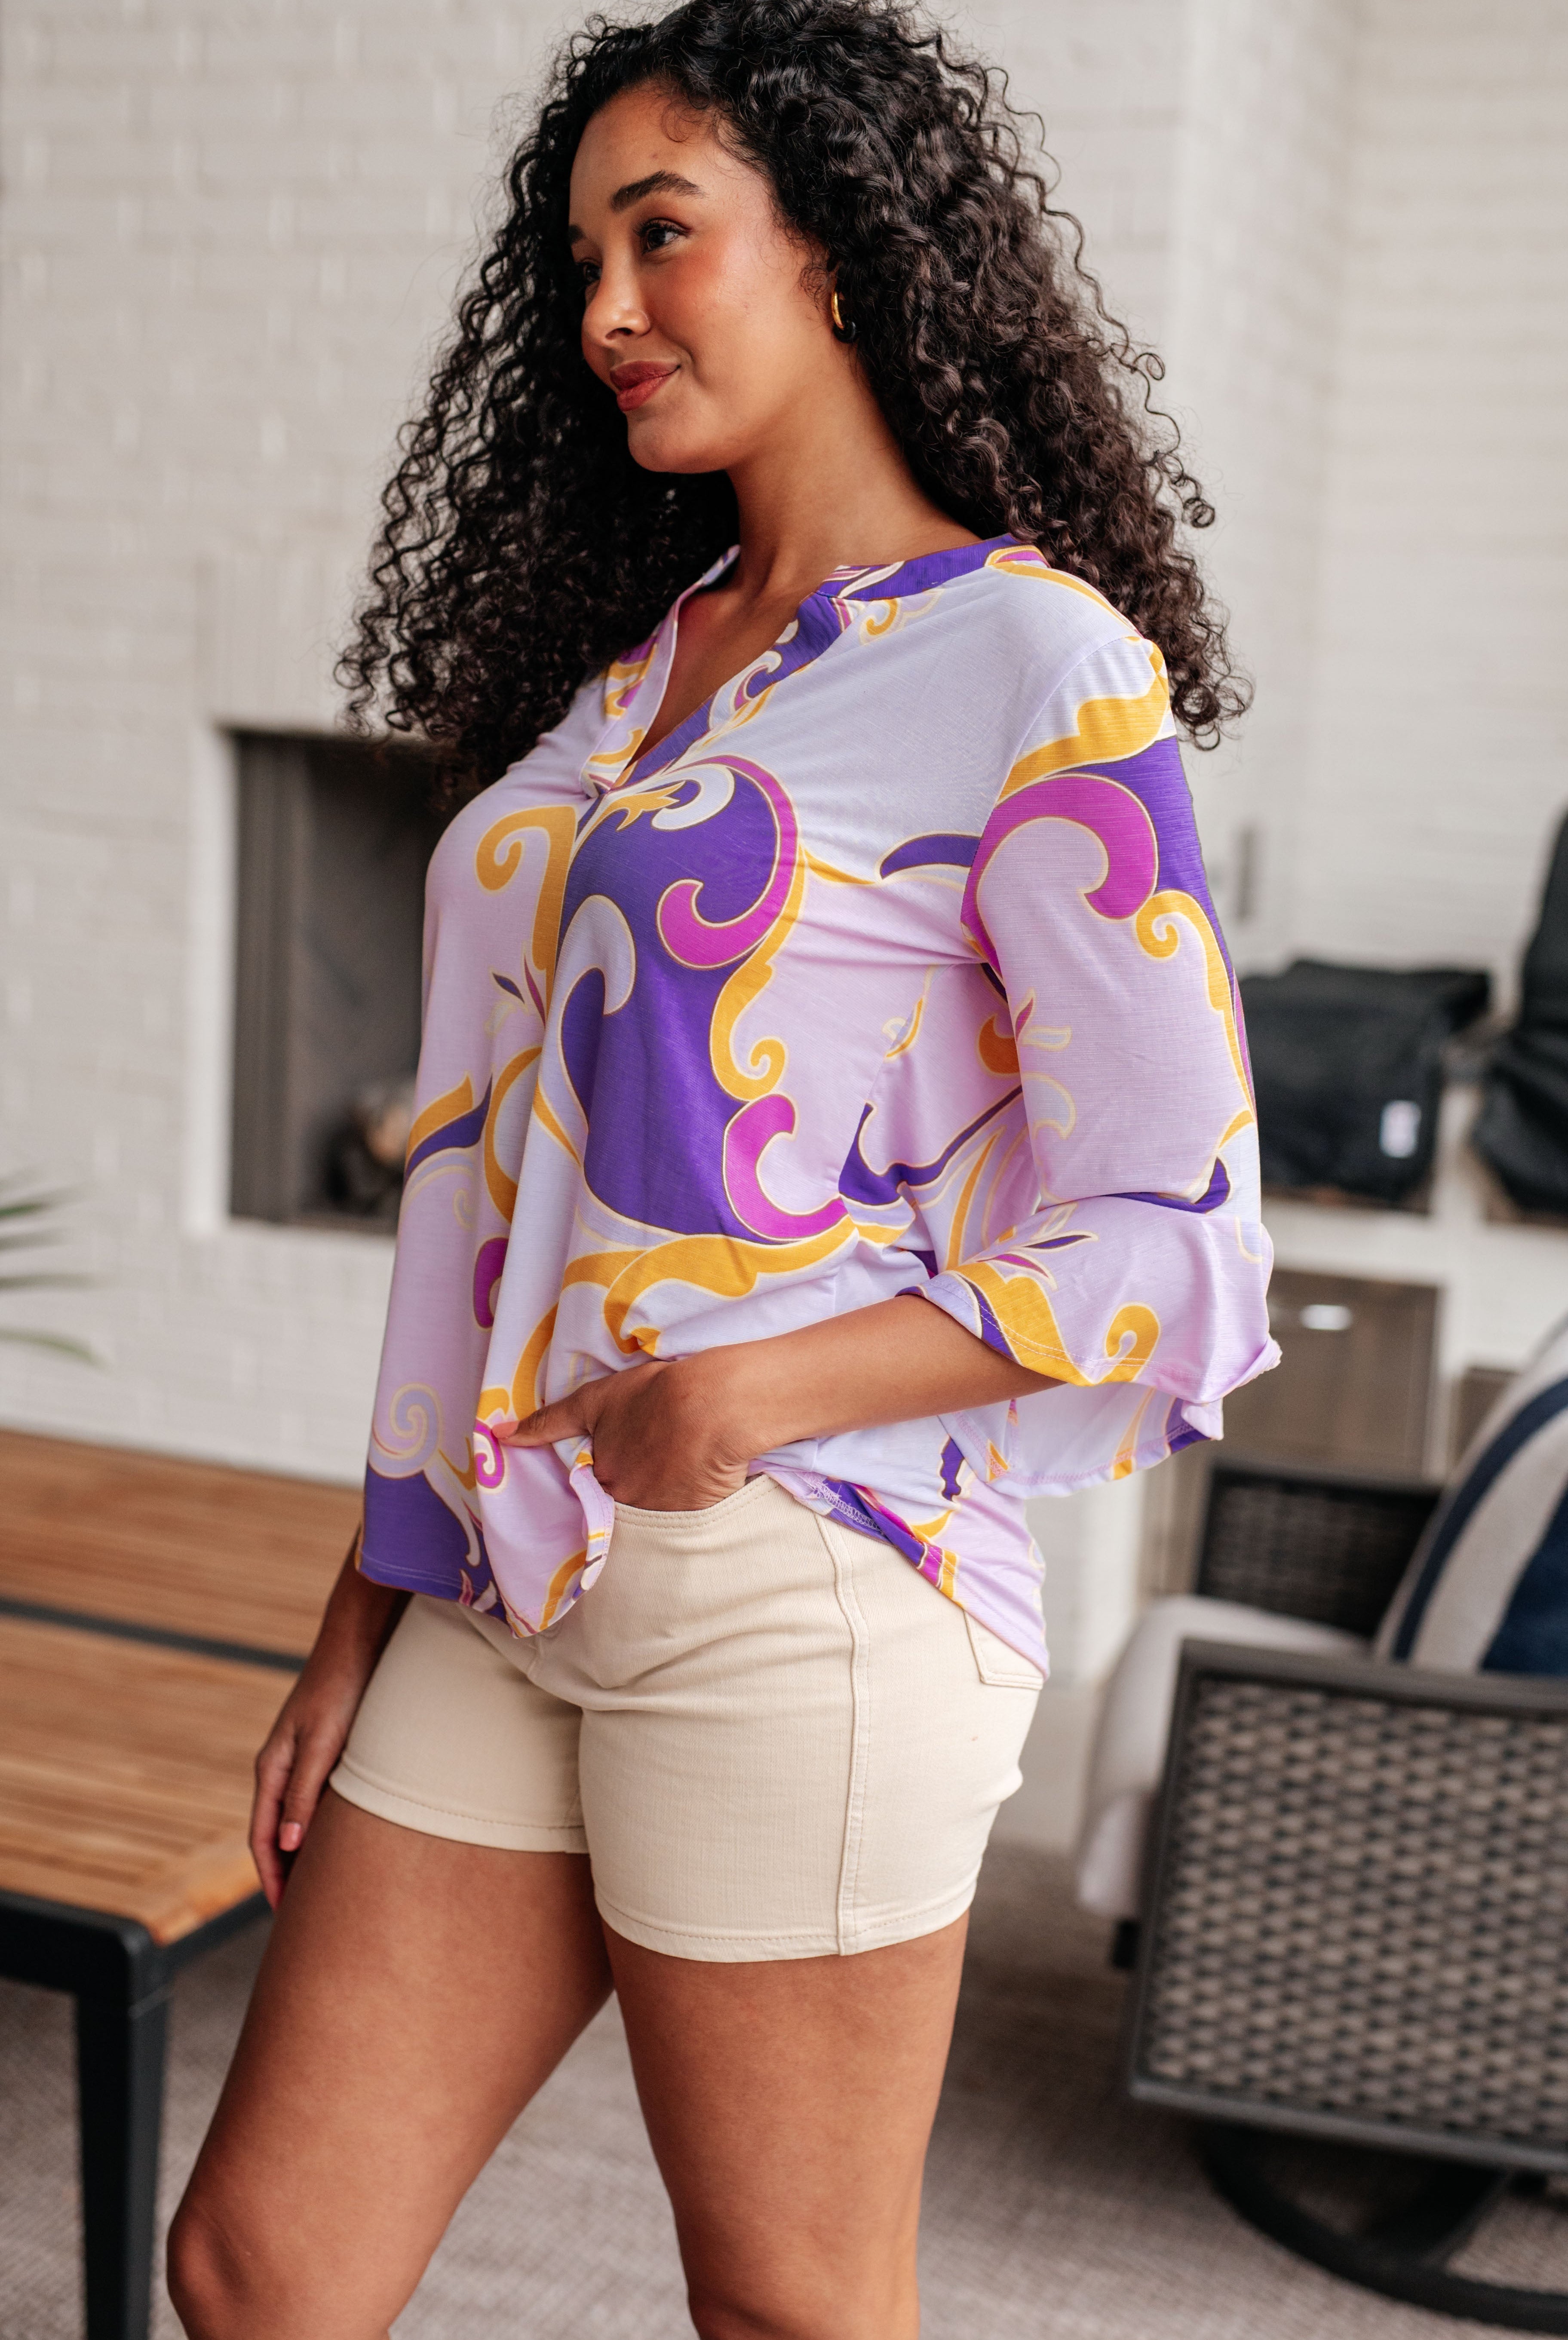 Lizzy Bell Sleeve Top in Regal Lavender and Gold-Tops-Ave Shops-Urban Threadz Boutique, Women's Fashion Boutique in Saugatuck, MI